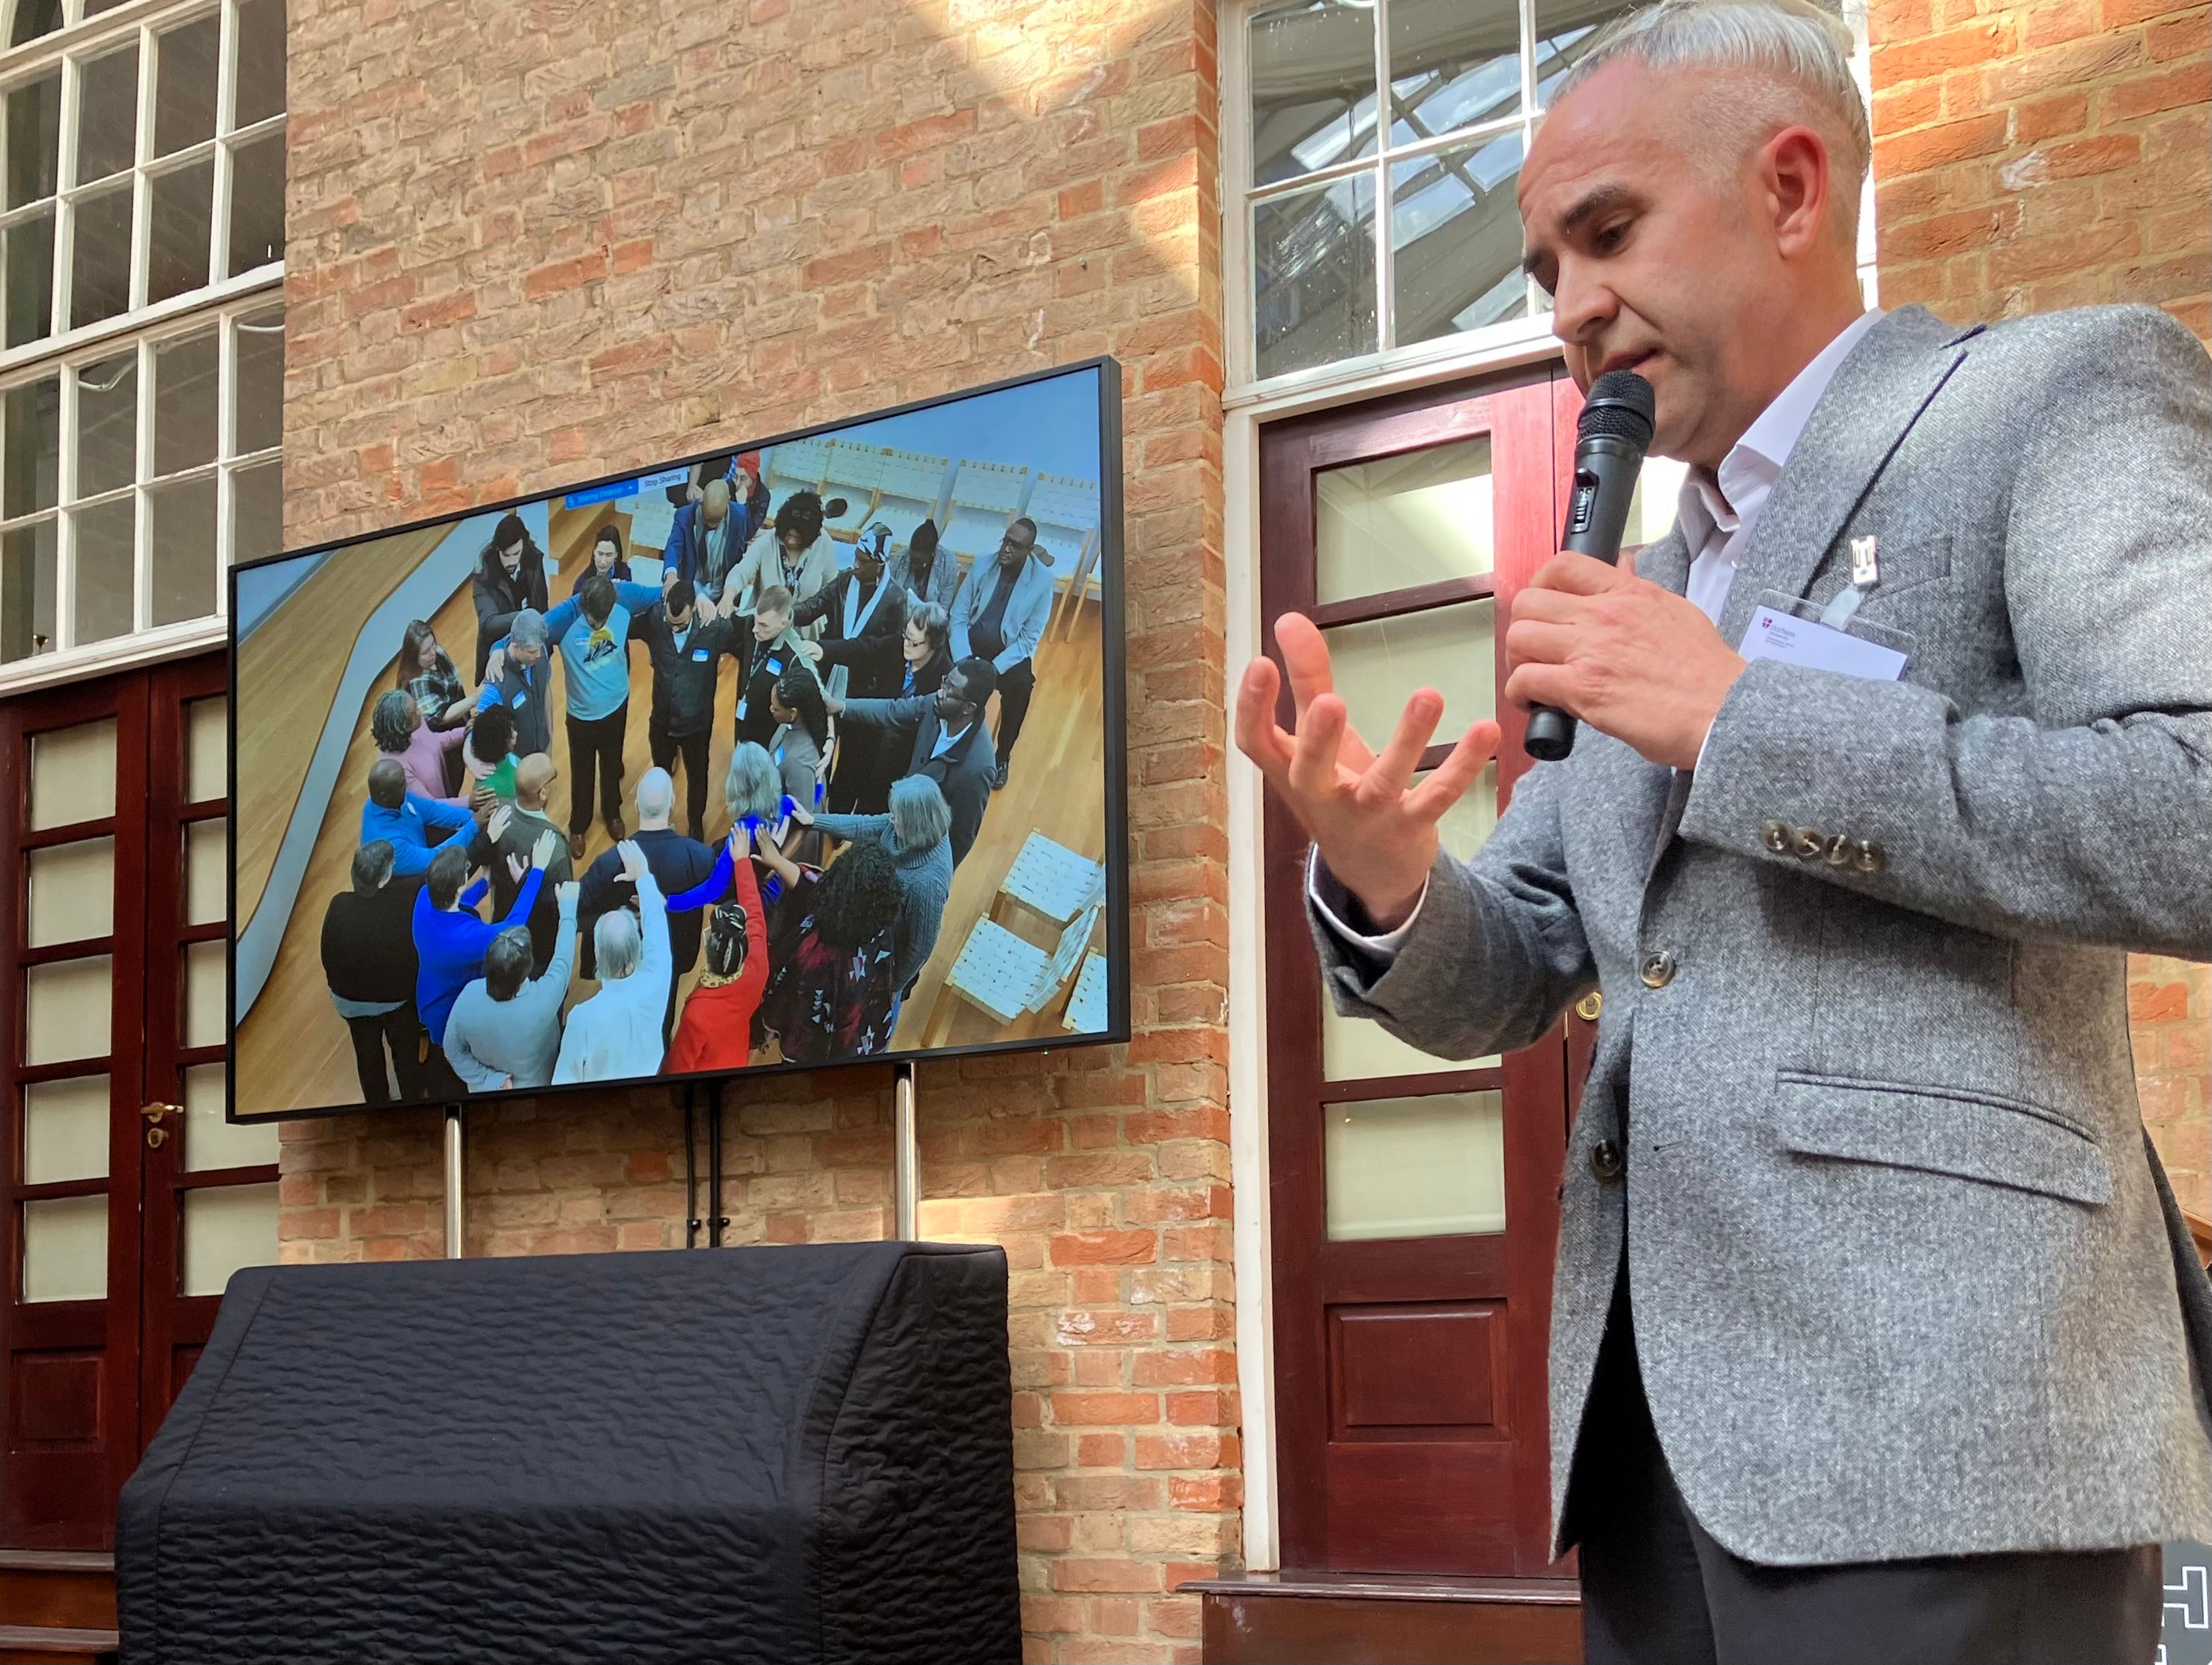 A man talking in front of a slide showing a photo of people gathered round in concentric circles